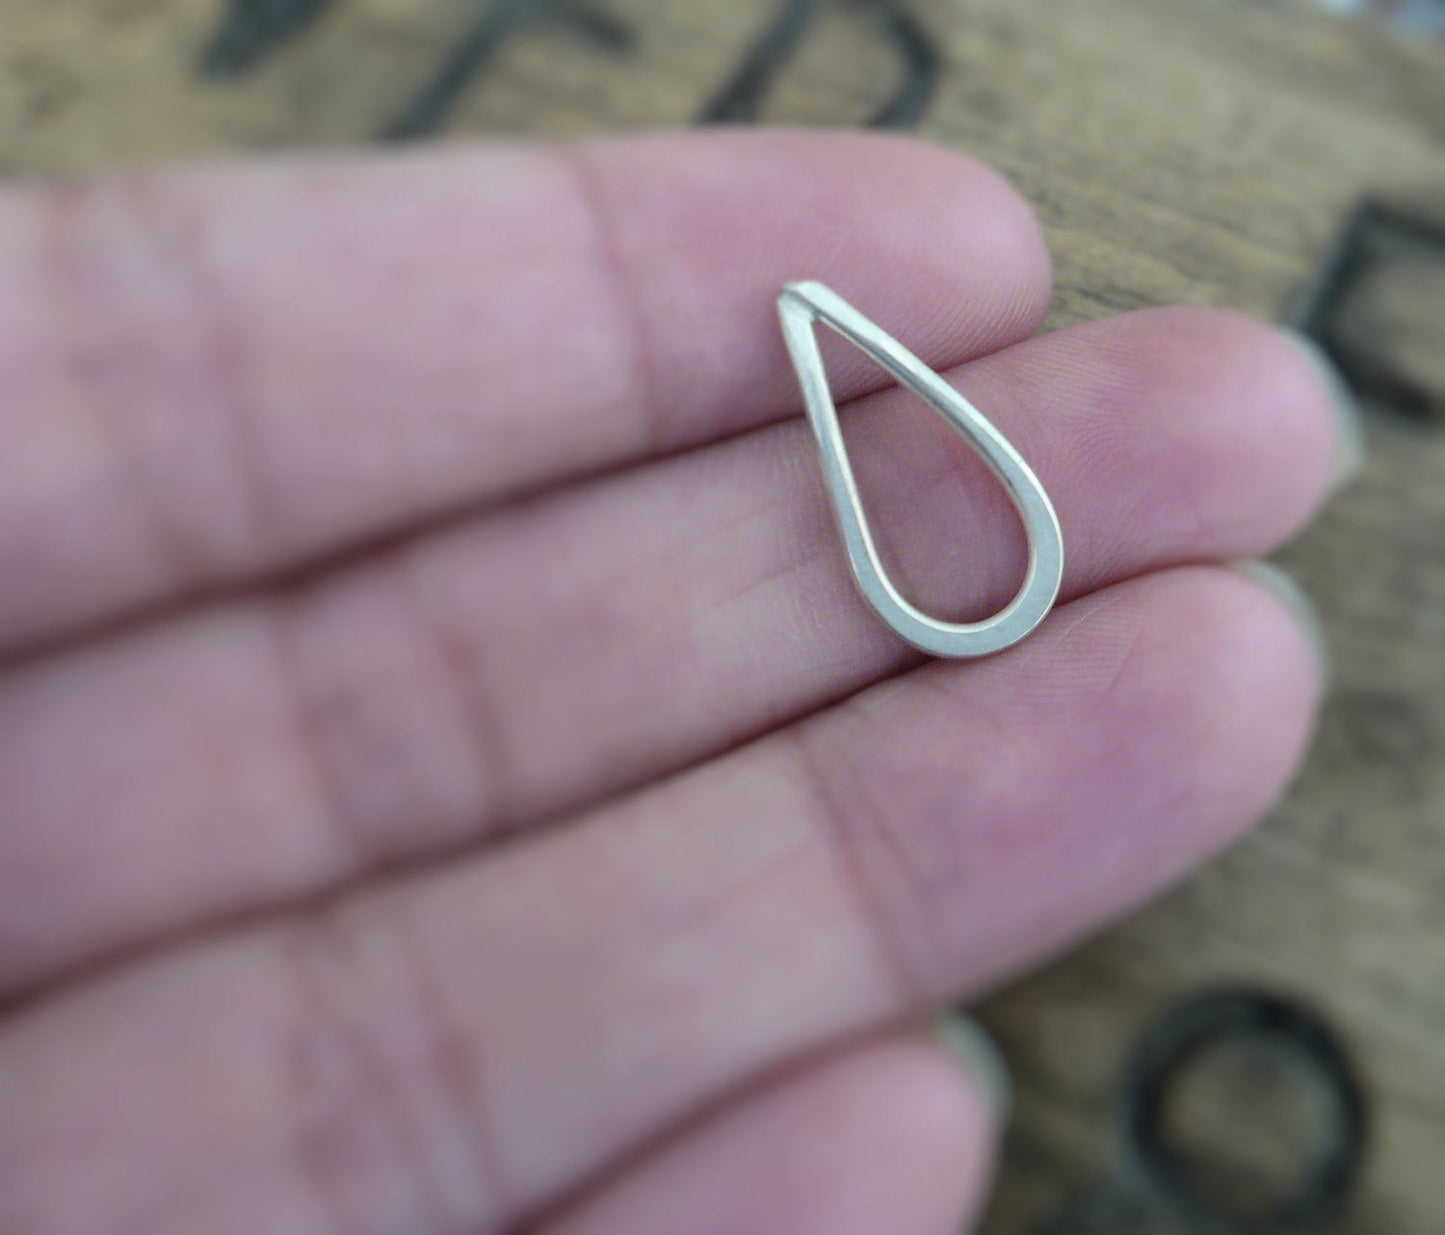 Small Handforged Sterling Silver Tear Drops - Handmade. Hand forged. 17mm.